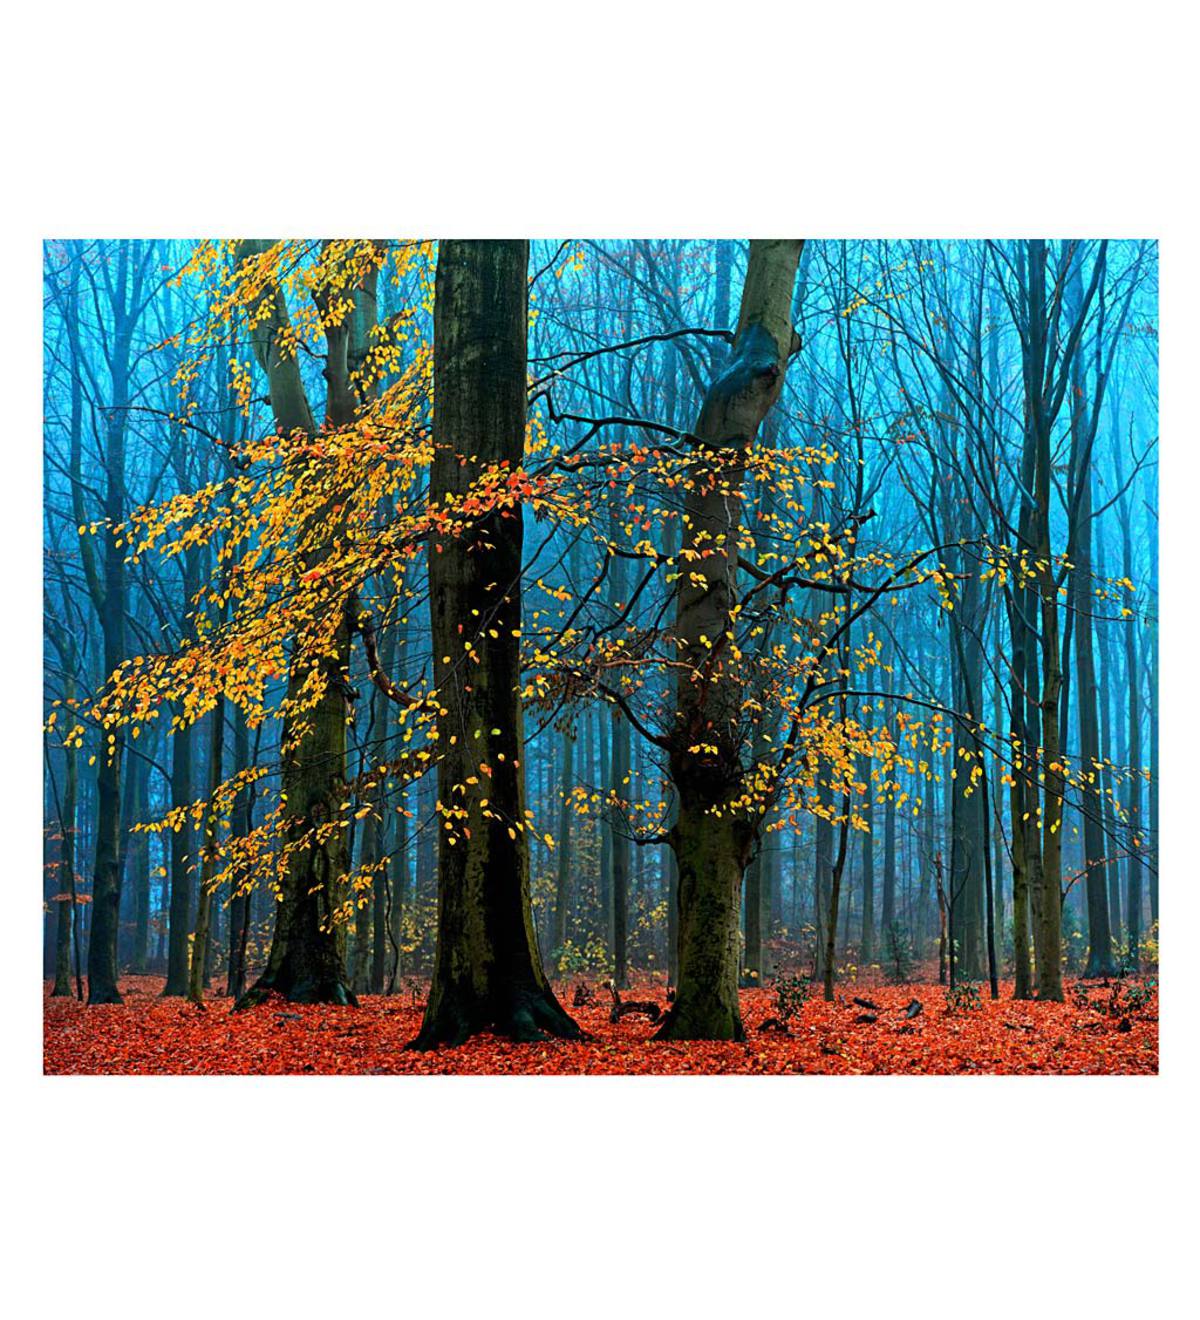 Colorful Autumn Forest Indoor/Outdoor Wall Art on Canvas